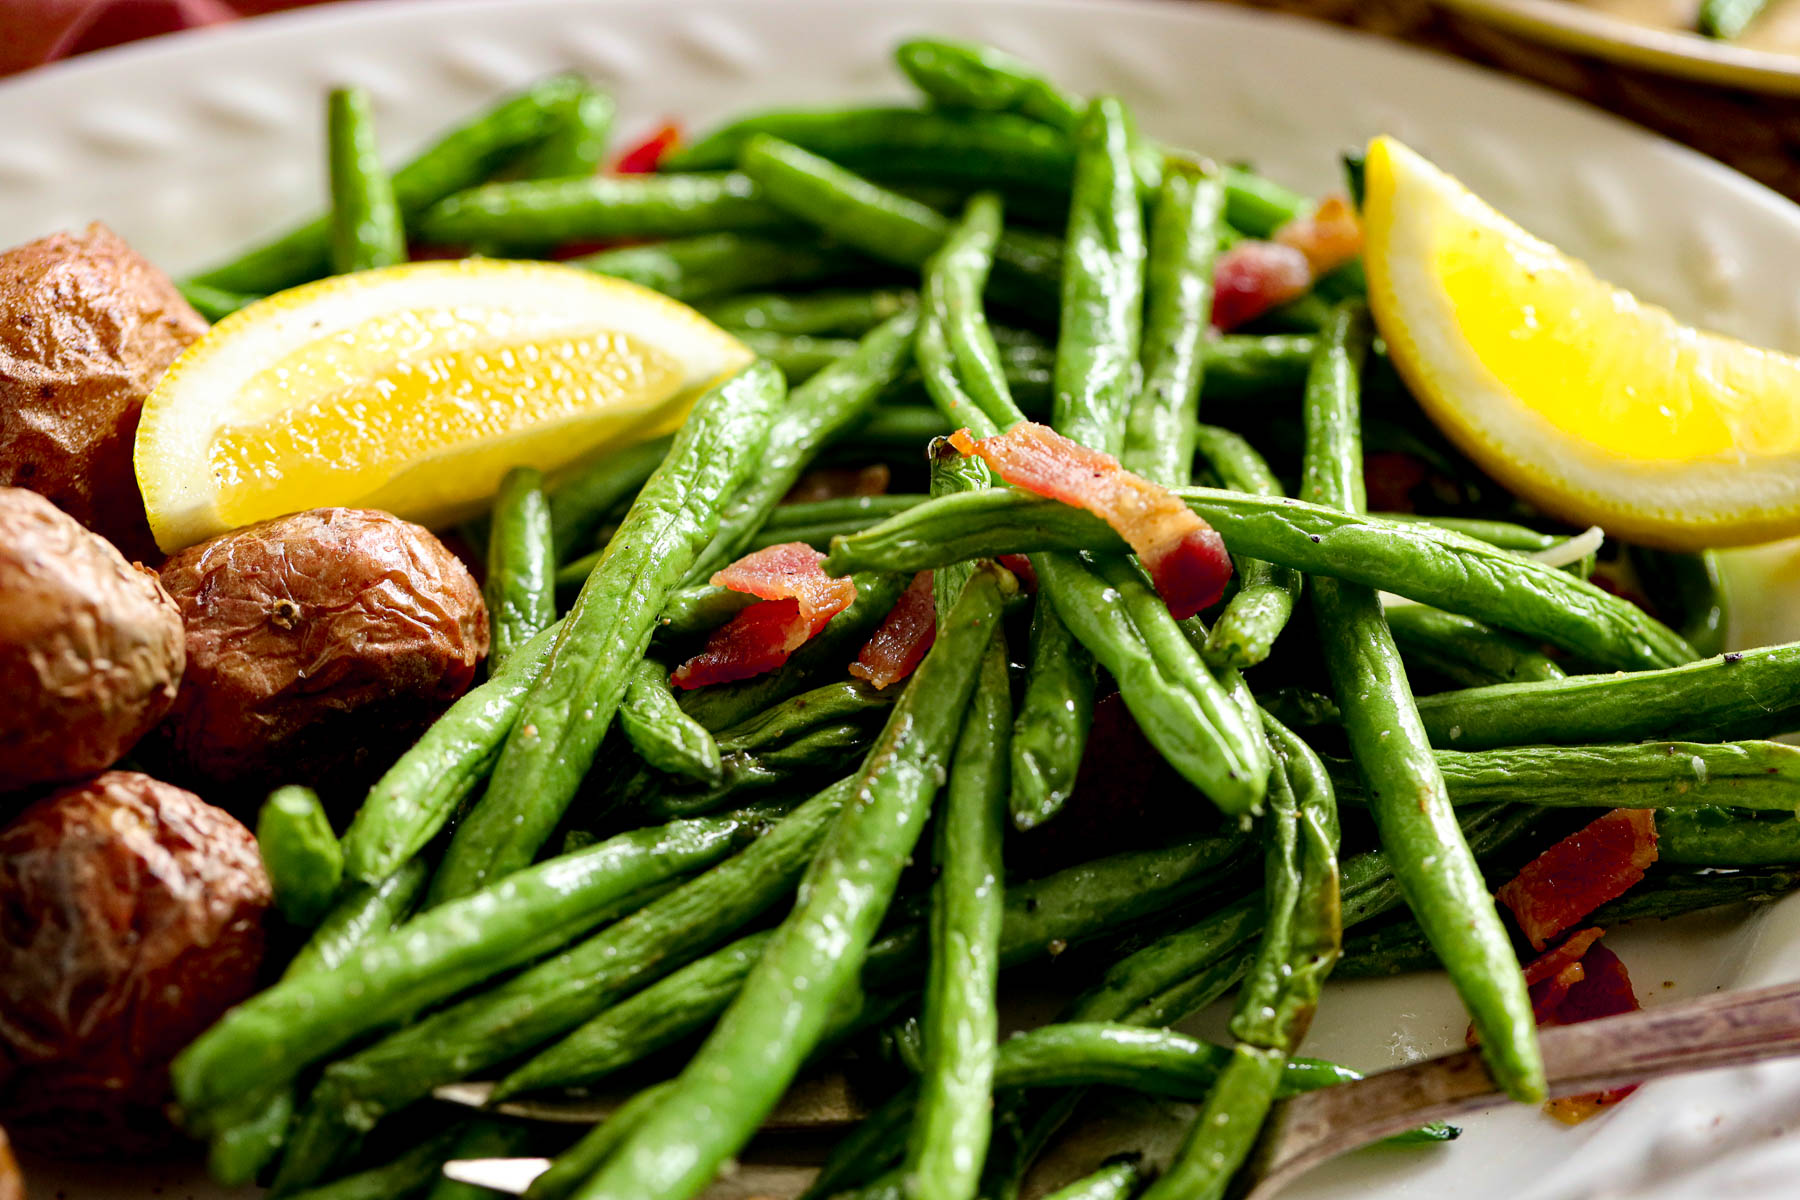 green beans with bacon bits and lemon wedges